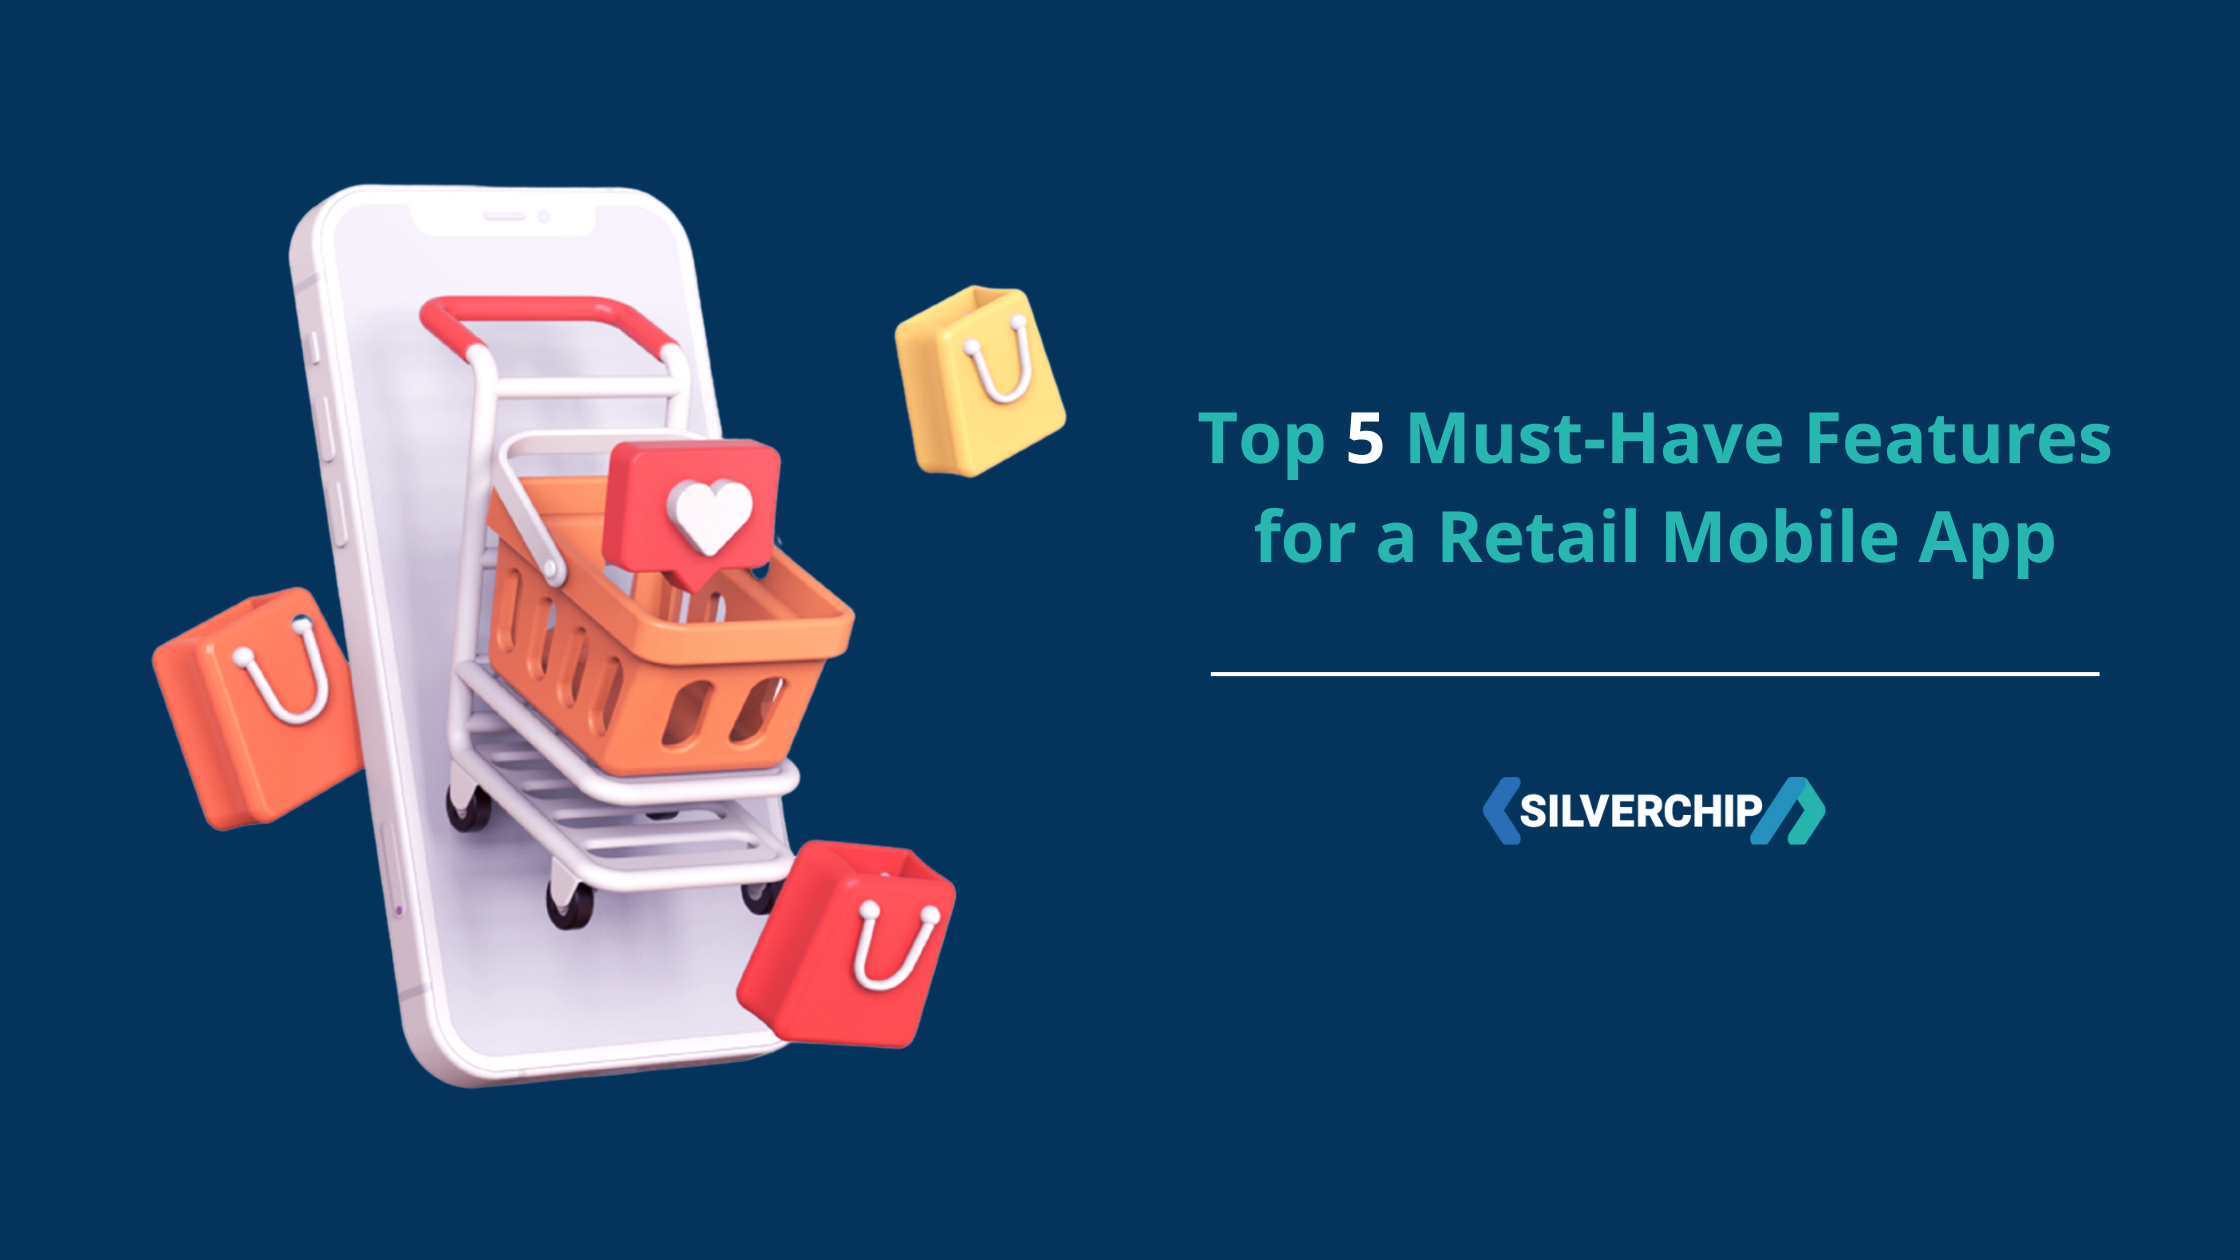 Top 5 Must-Have Features for a Retail Mobile App